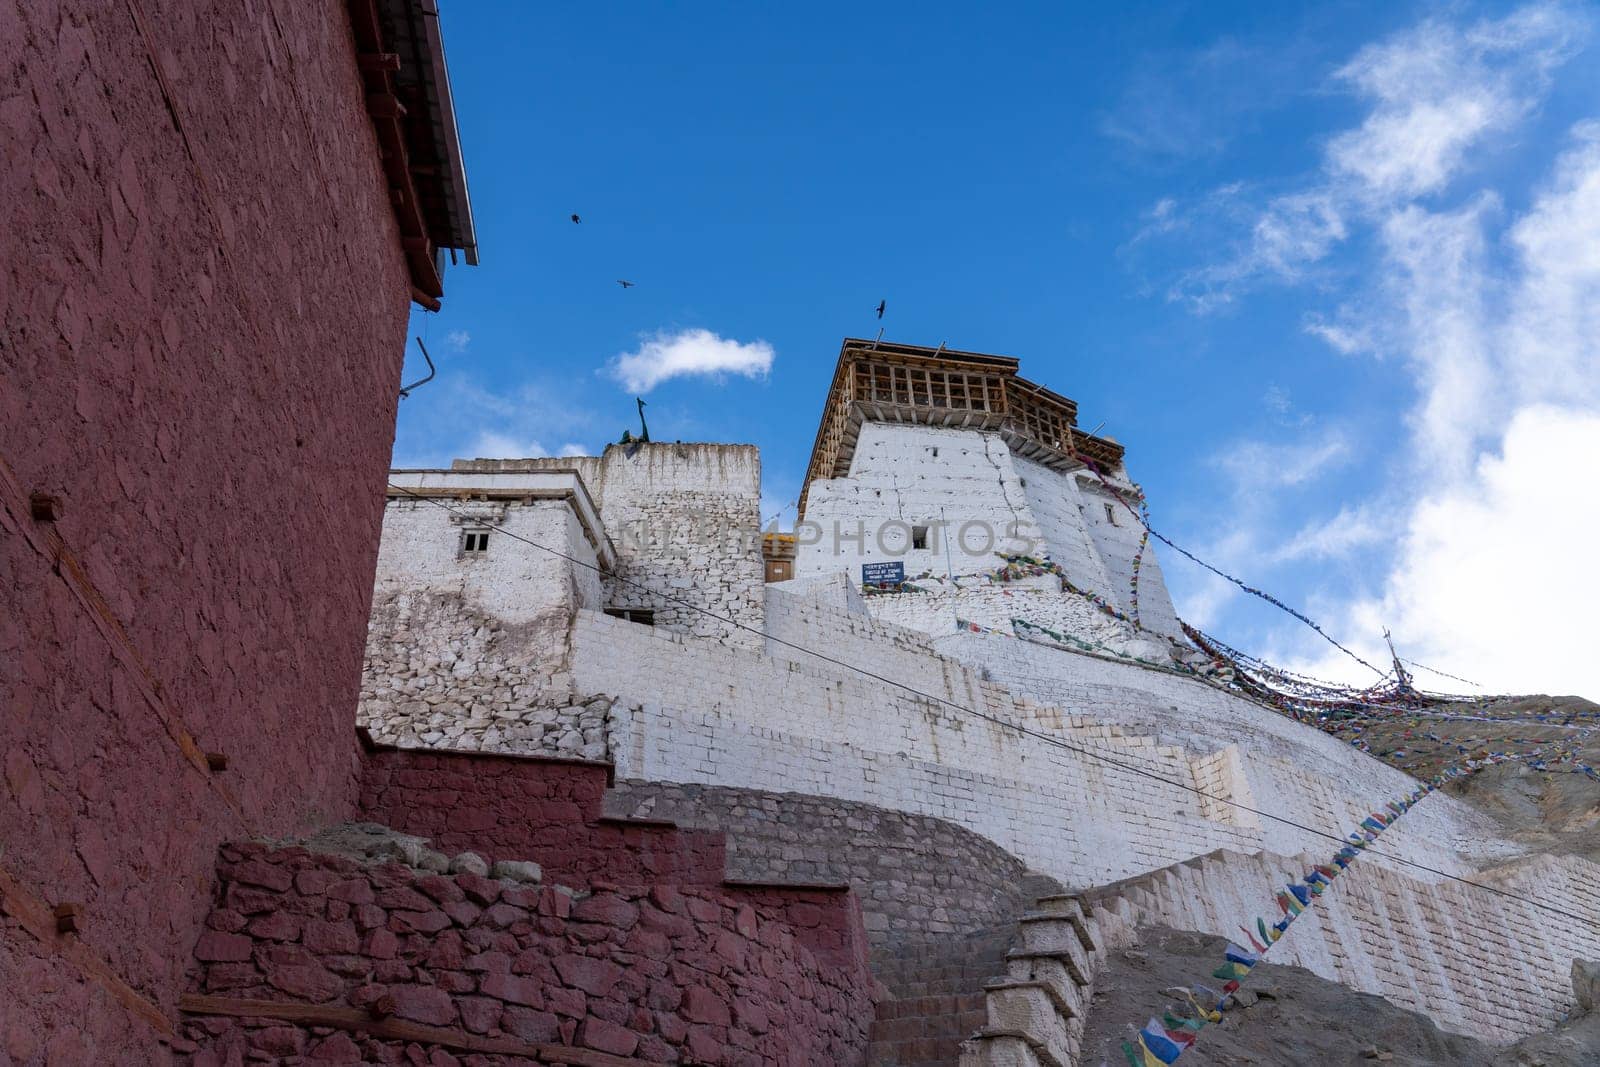 Leh, India - April 04, 2023: Namgyal Tsemo Monastery, a Buddhist monastery located on a hilltop overlooking Leh